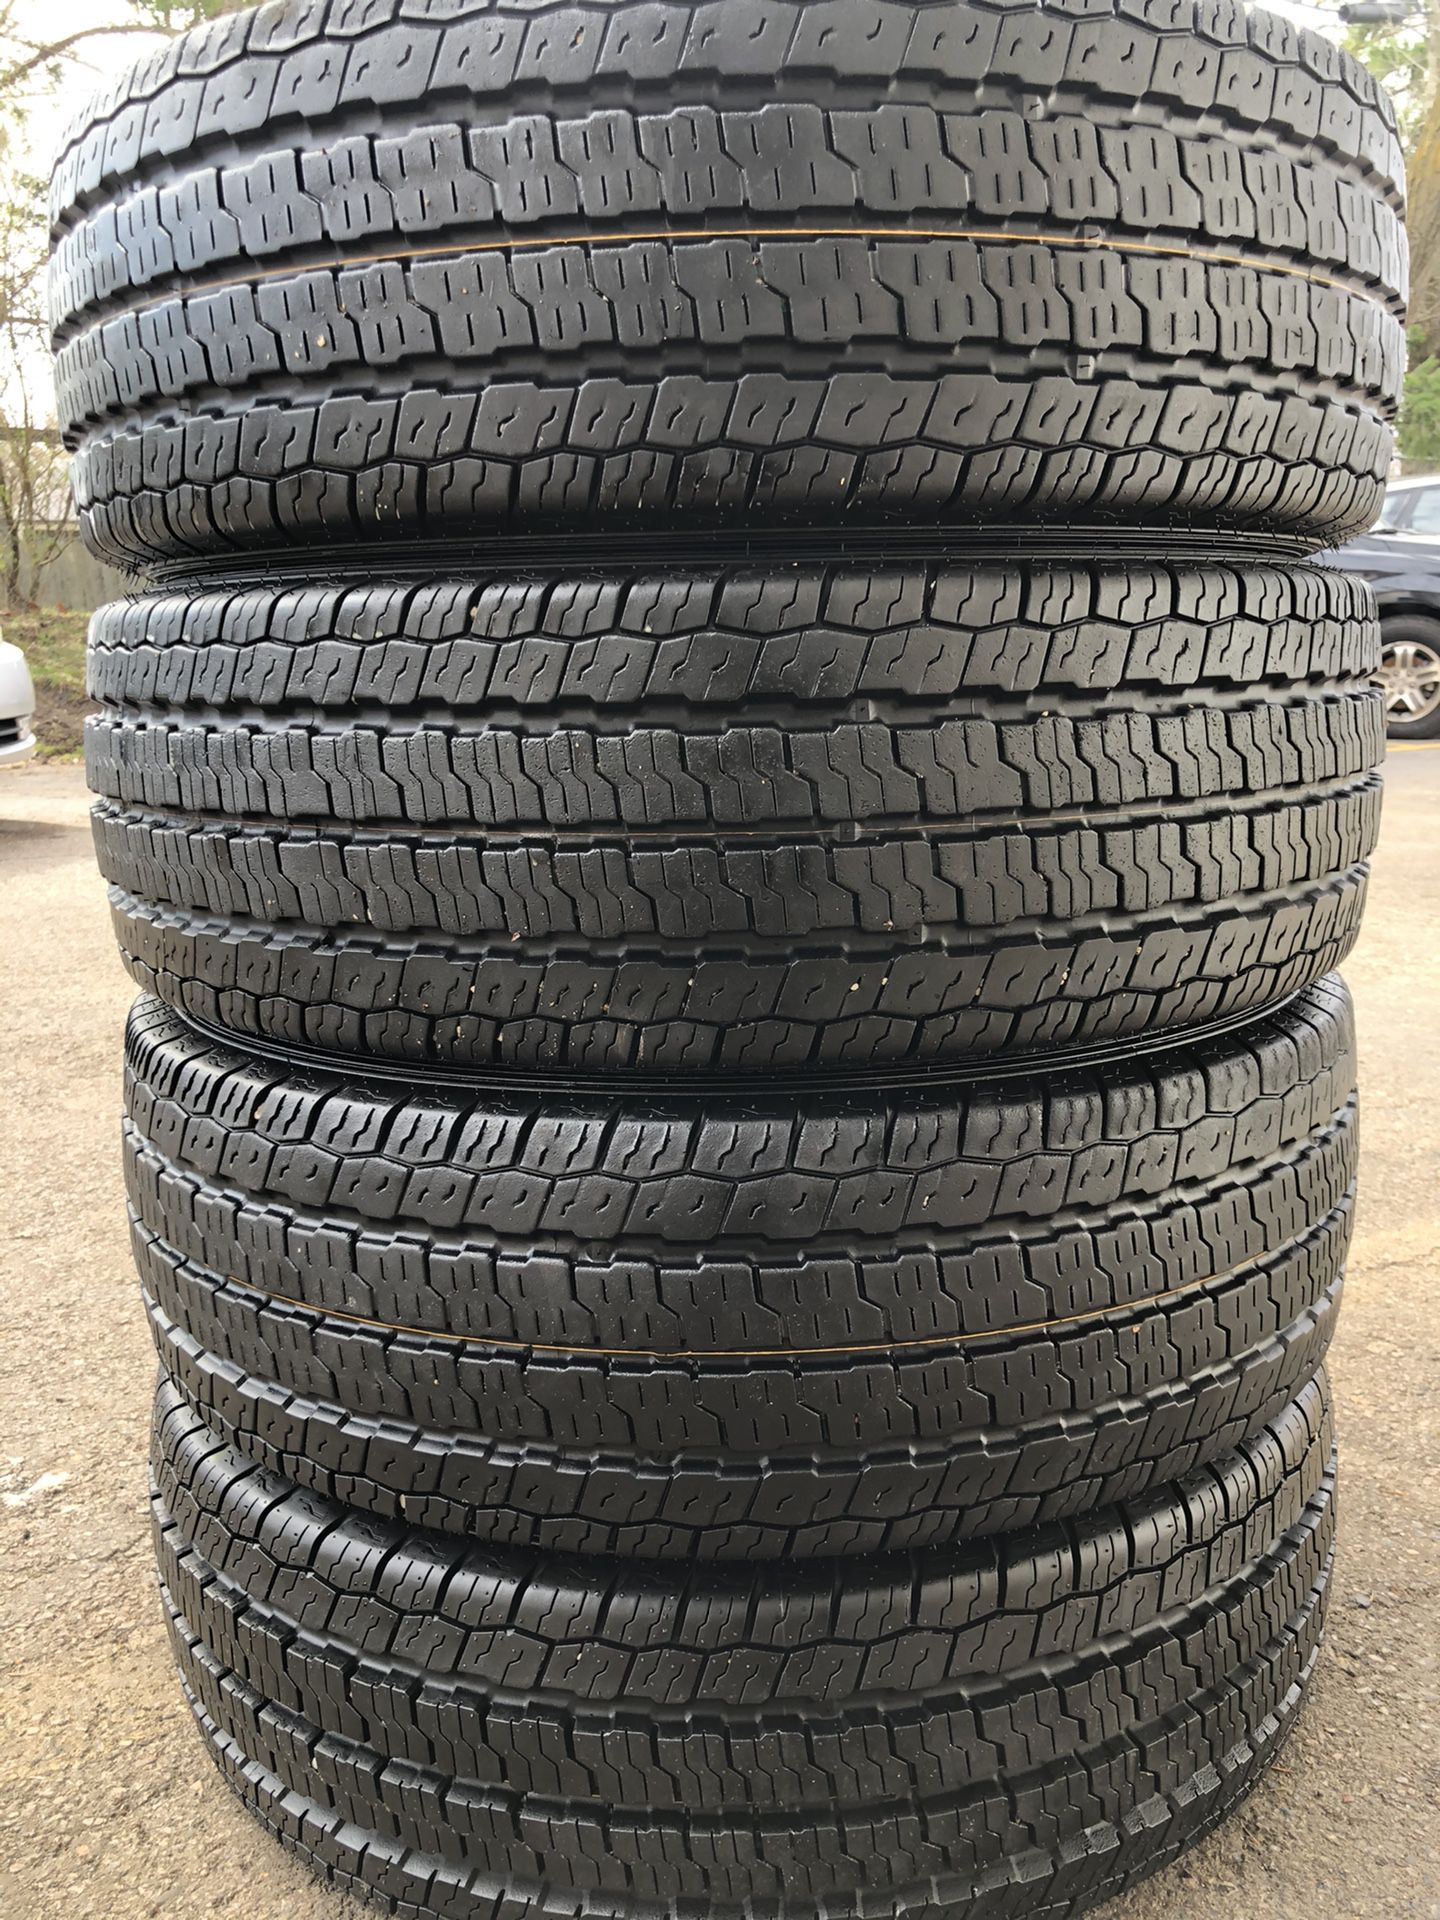 Nexen tires — one LT 225/75/16. 3 -22575/16 c ...like news mounted and balancing available